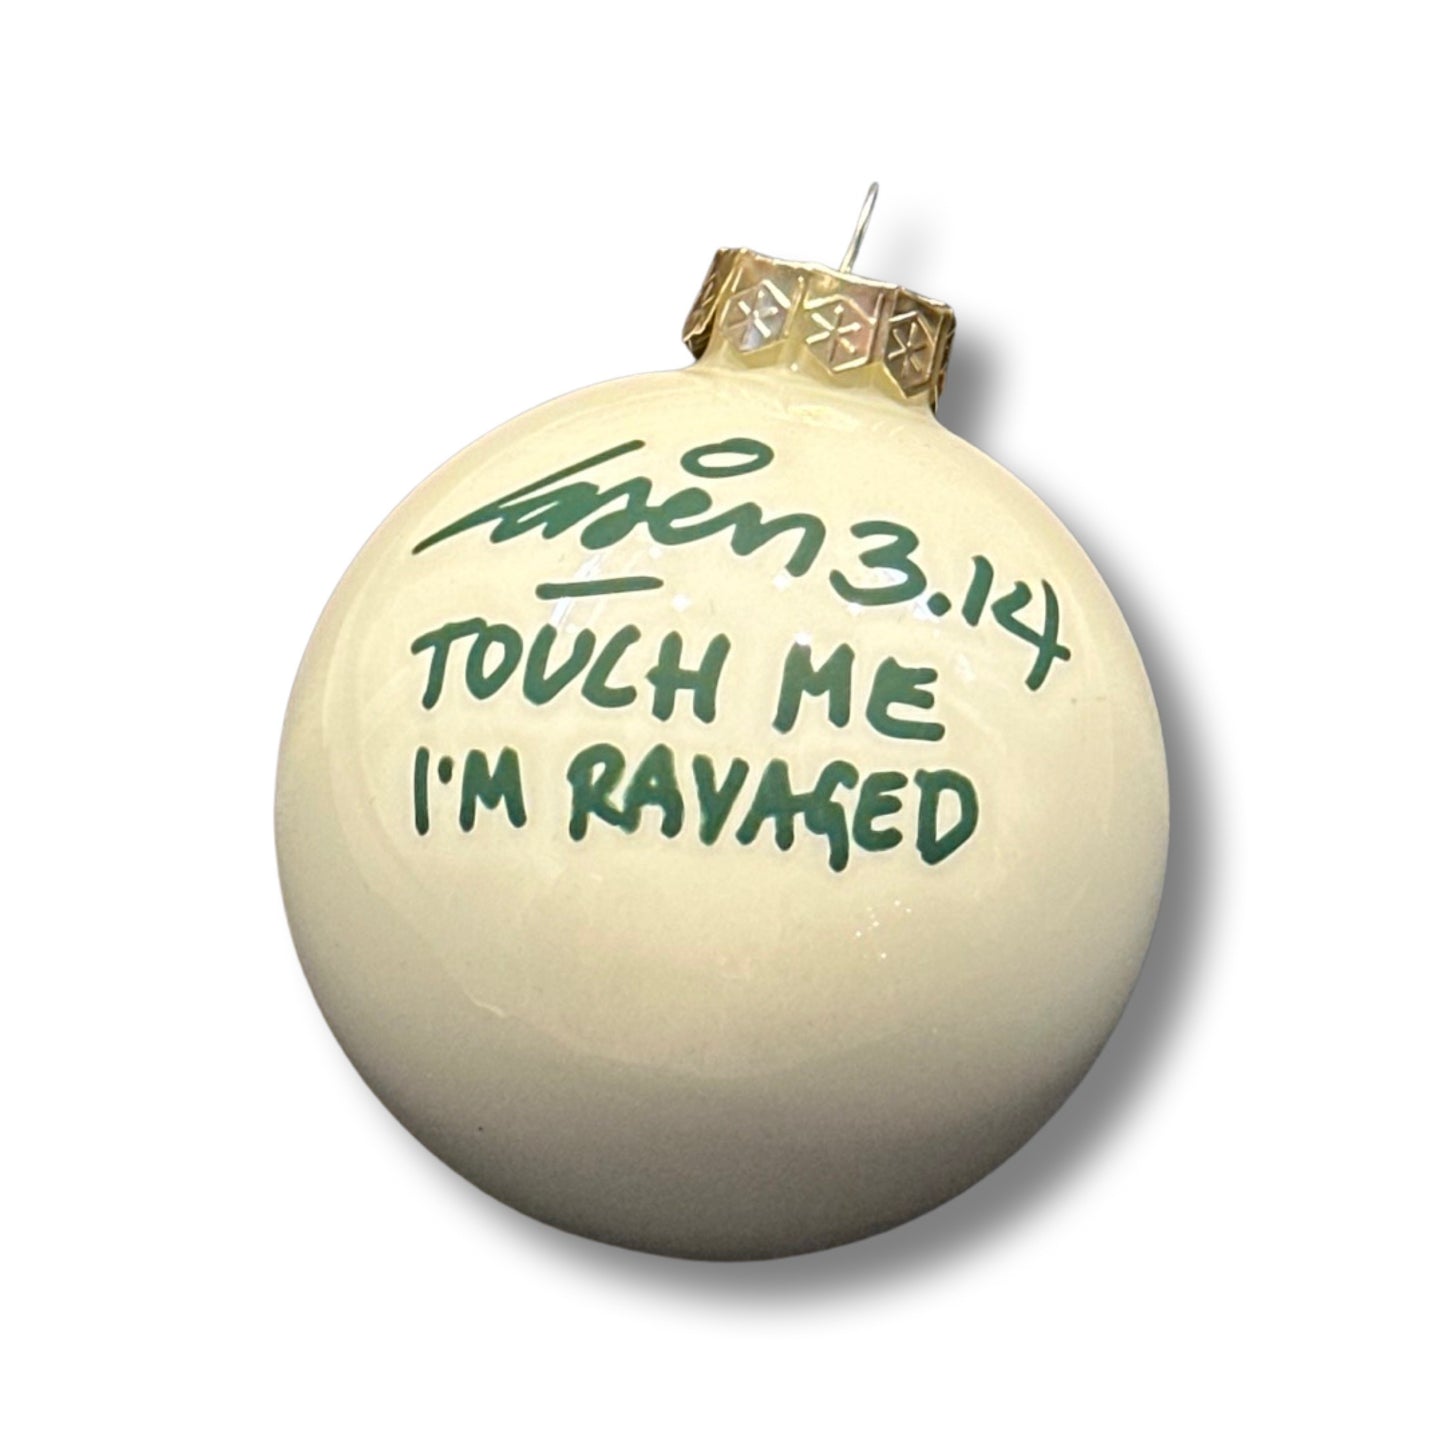 Touch Me I'M Ravaged | Laser 3.14 x Famous Amsterdam Christmas Ball Ornament